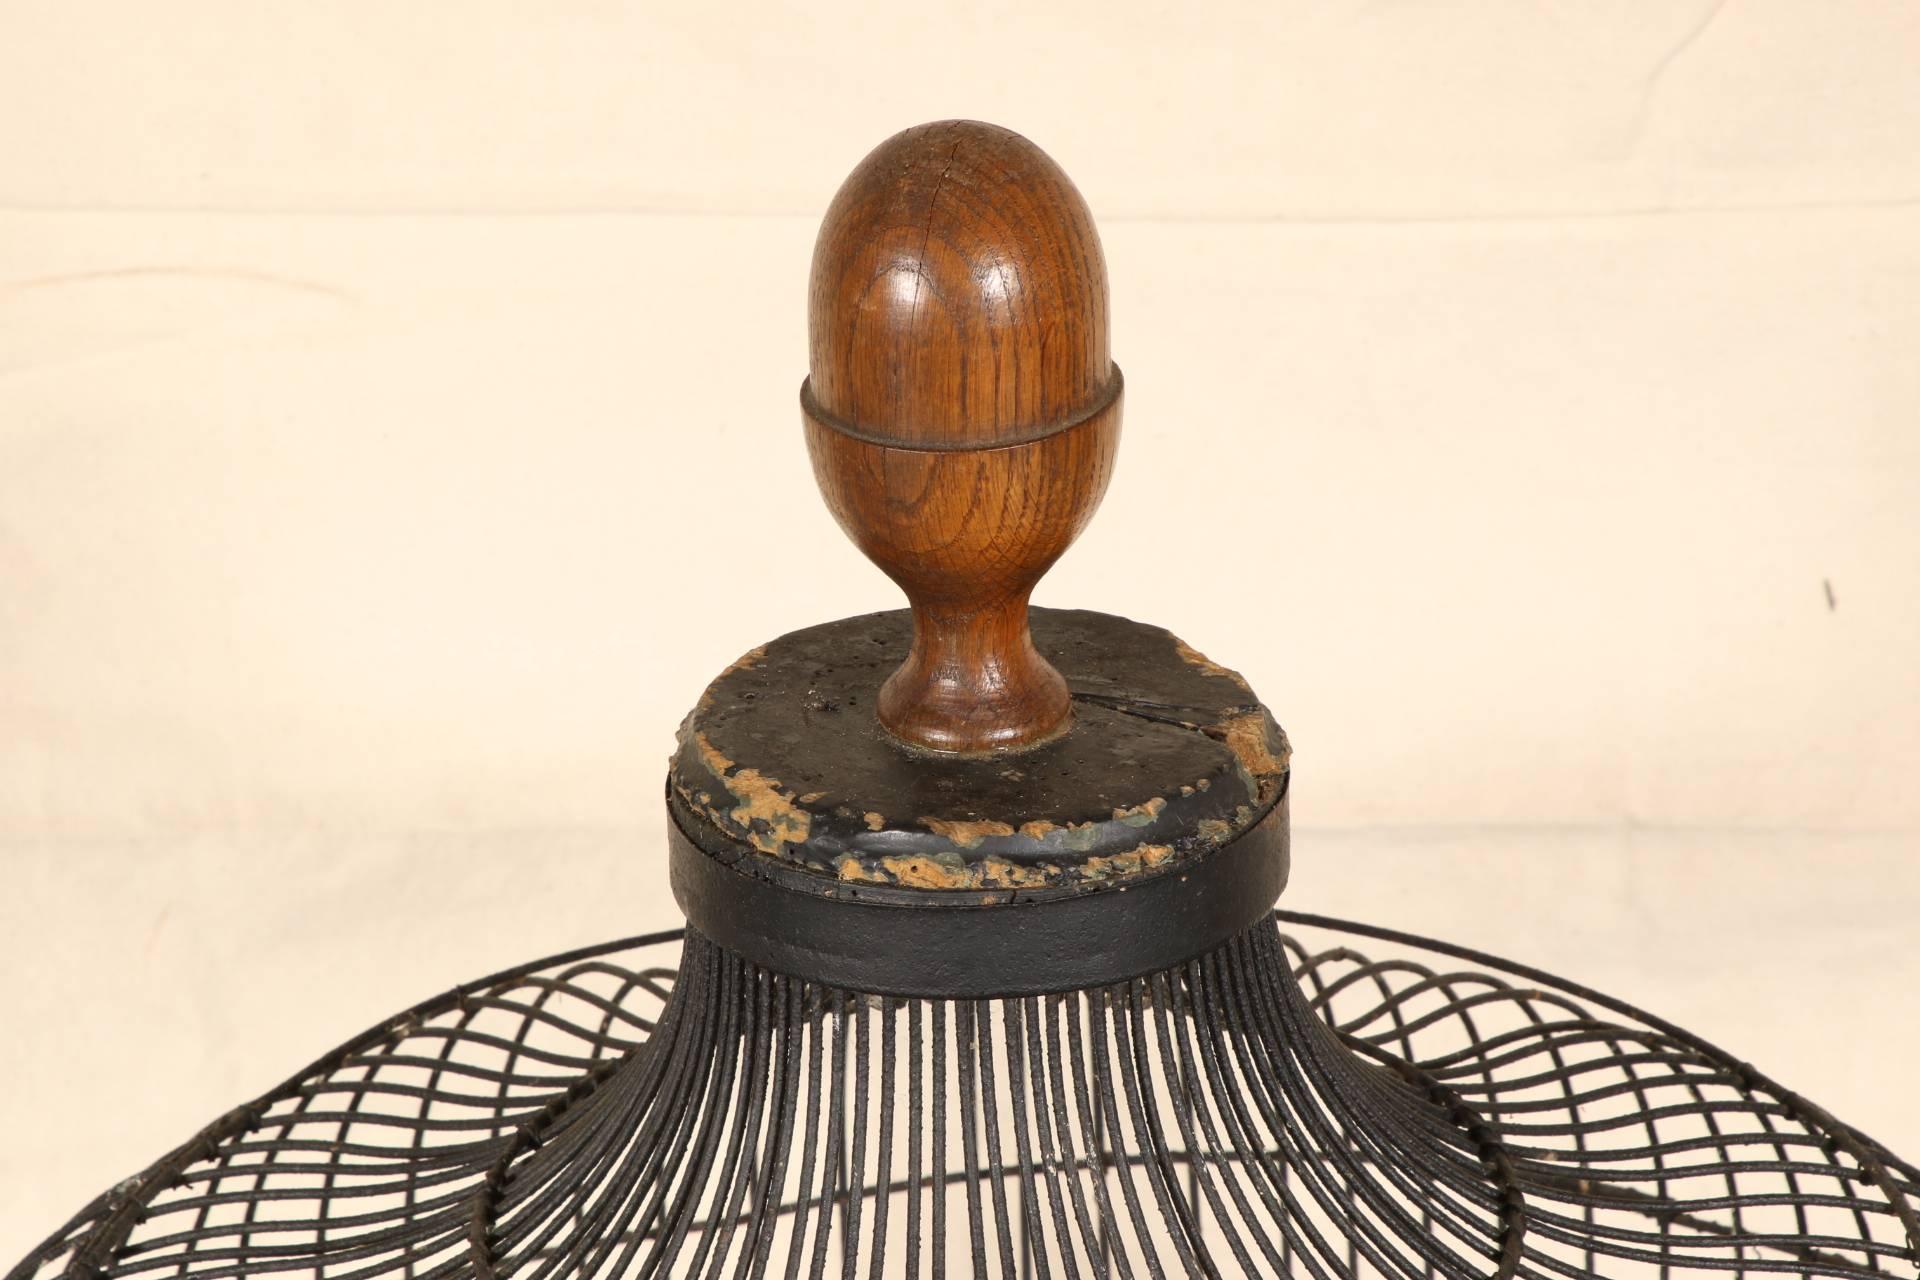 Ebonized wood base and top with turned walnut finial. The black wire cage with canted corners ad two cup windows with one copper cup preserved. A single door. The base is open below the wire bottom.
Condition: Chipped top, worn base.